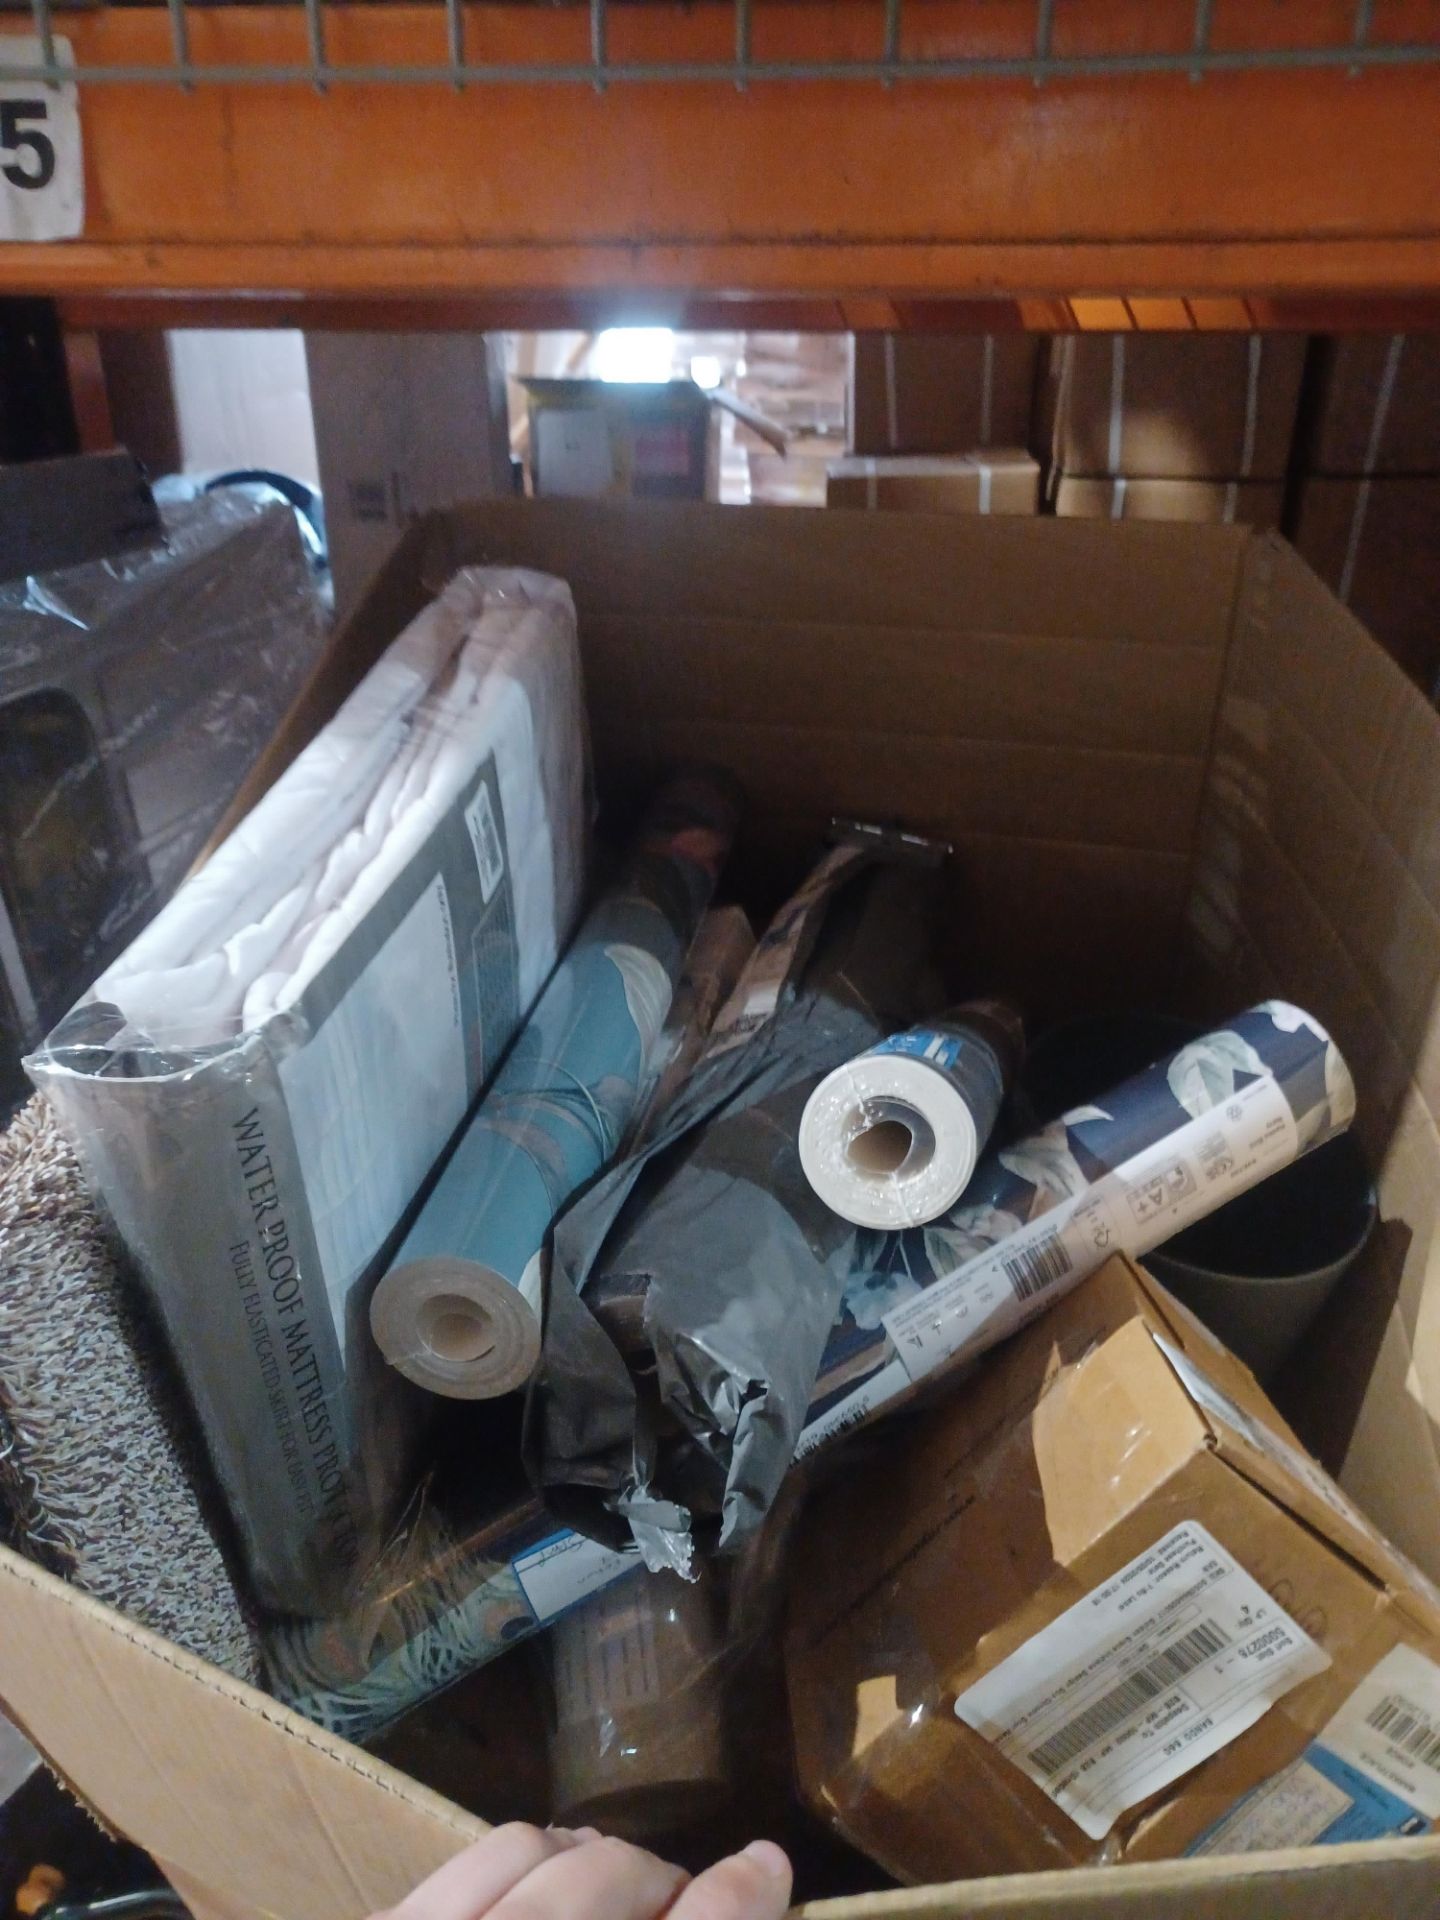 30 x Mixed Lot to include; Mattress Protectors, Wallpaper, Homeware Goods and more. - R14.7.